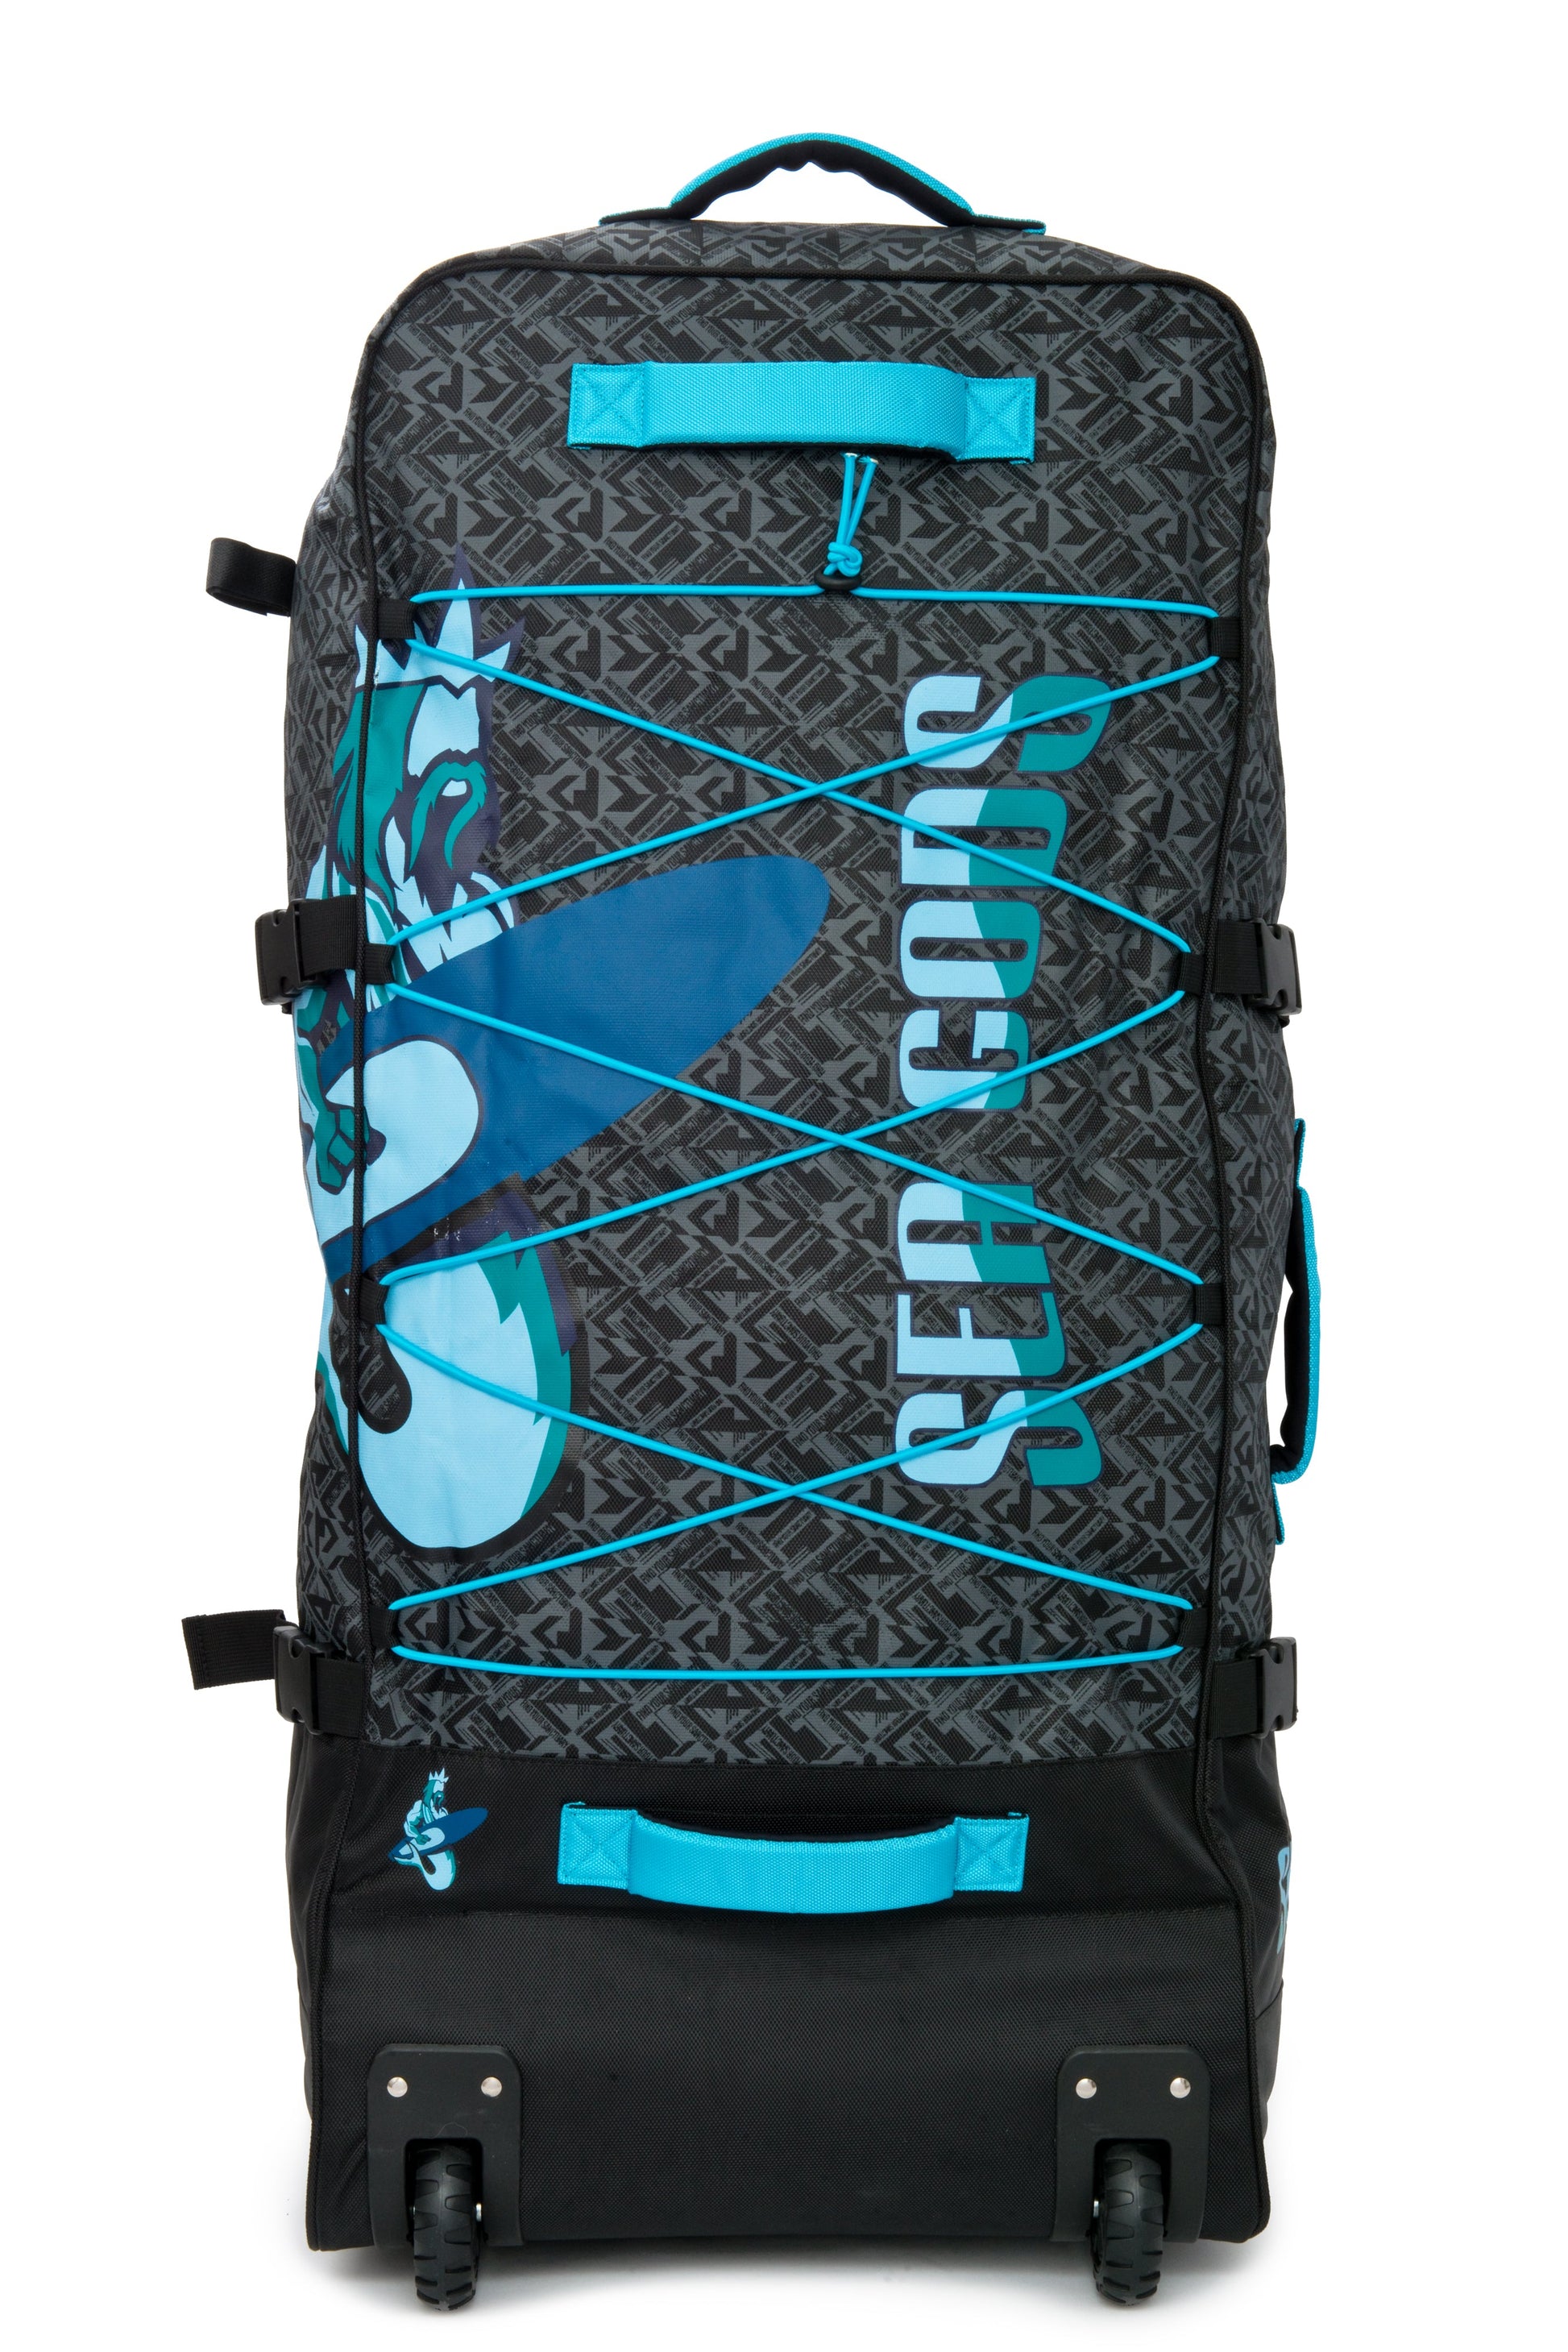 Seagods Stand Up Paddleboards Wheeled carry bag